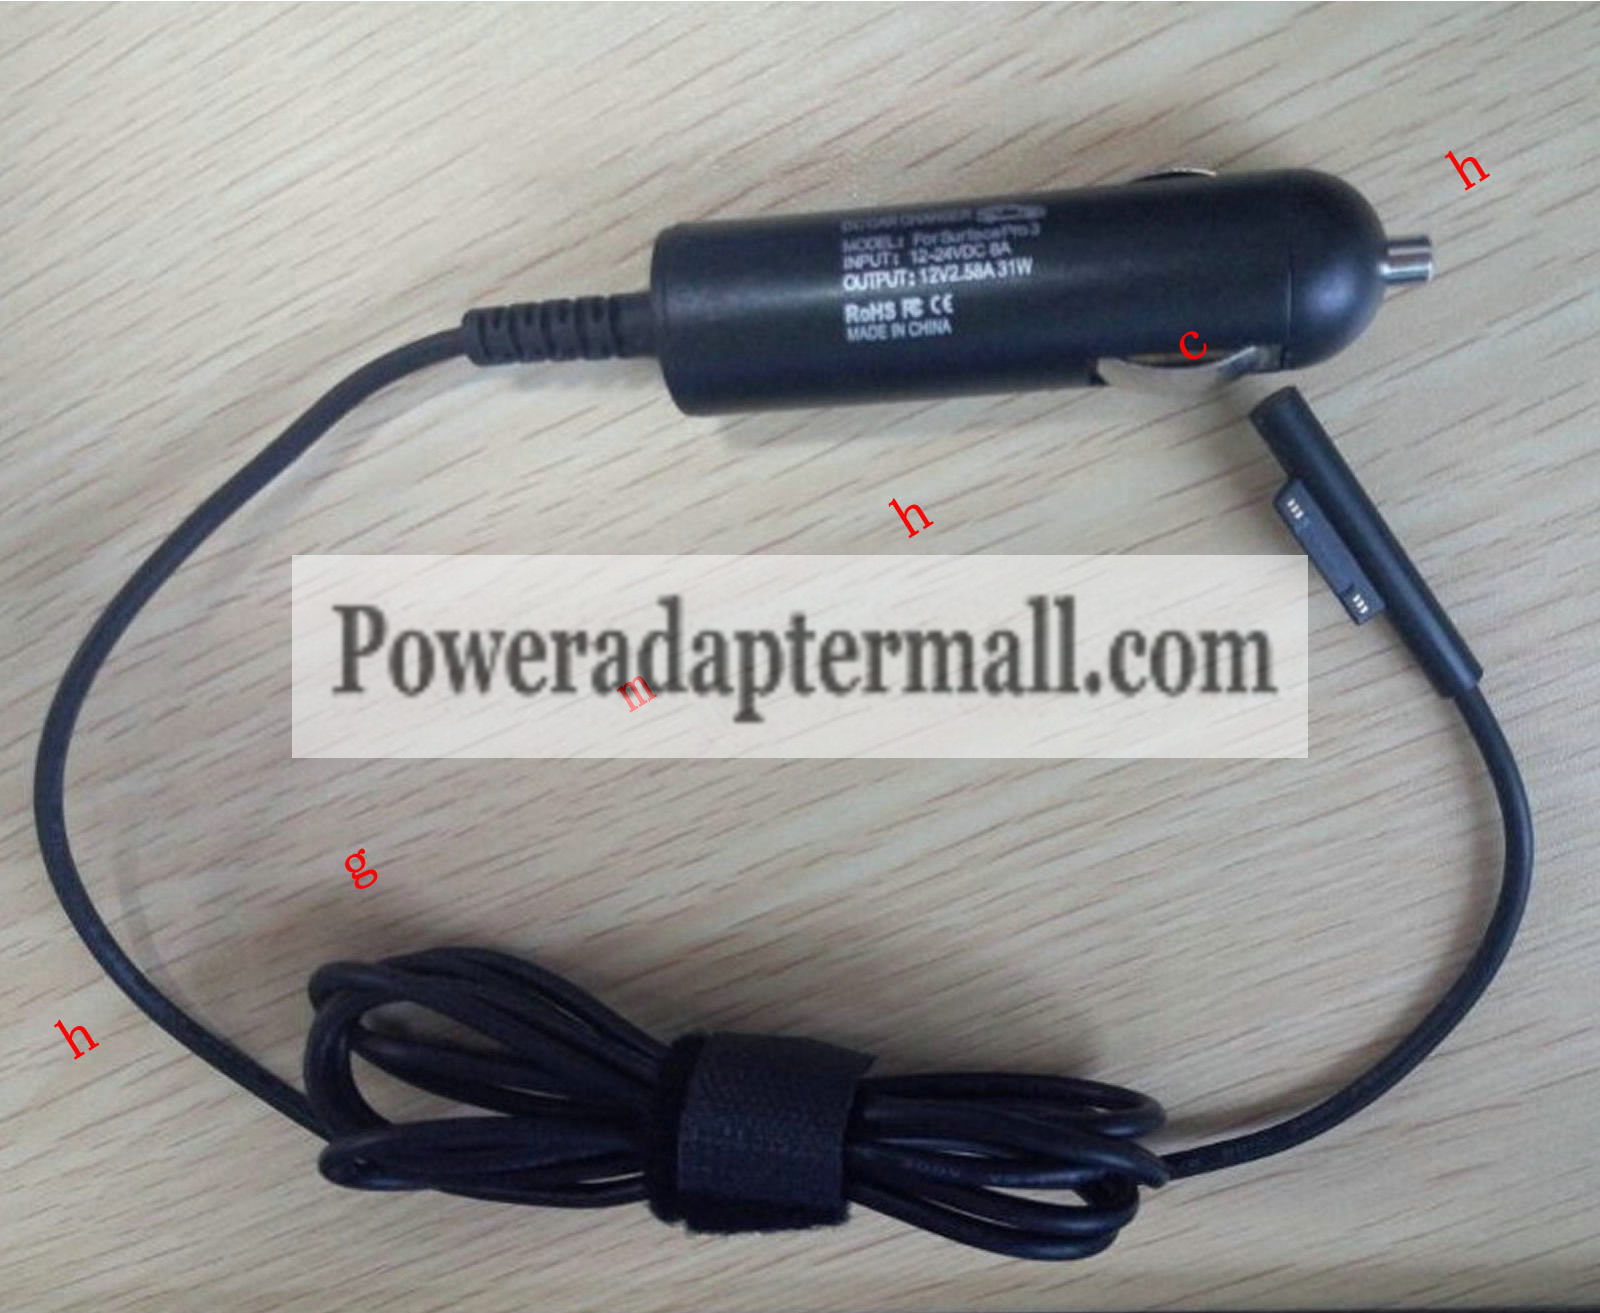 DC Car Charger for Microsoft Surface Pro 3,3UY-00001 Tablet/Lapt